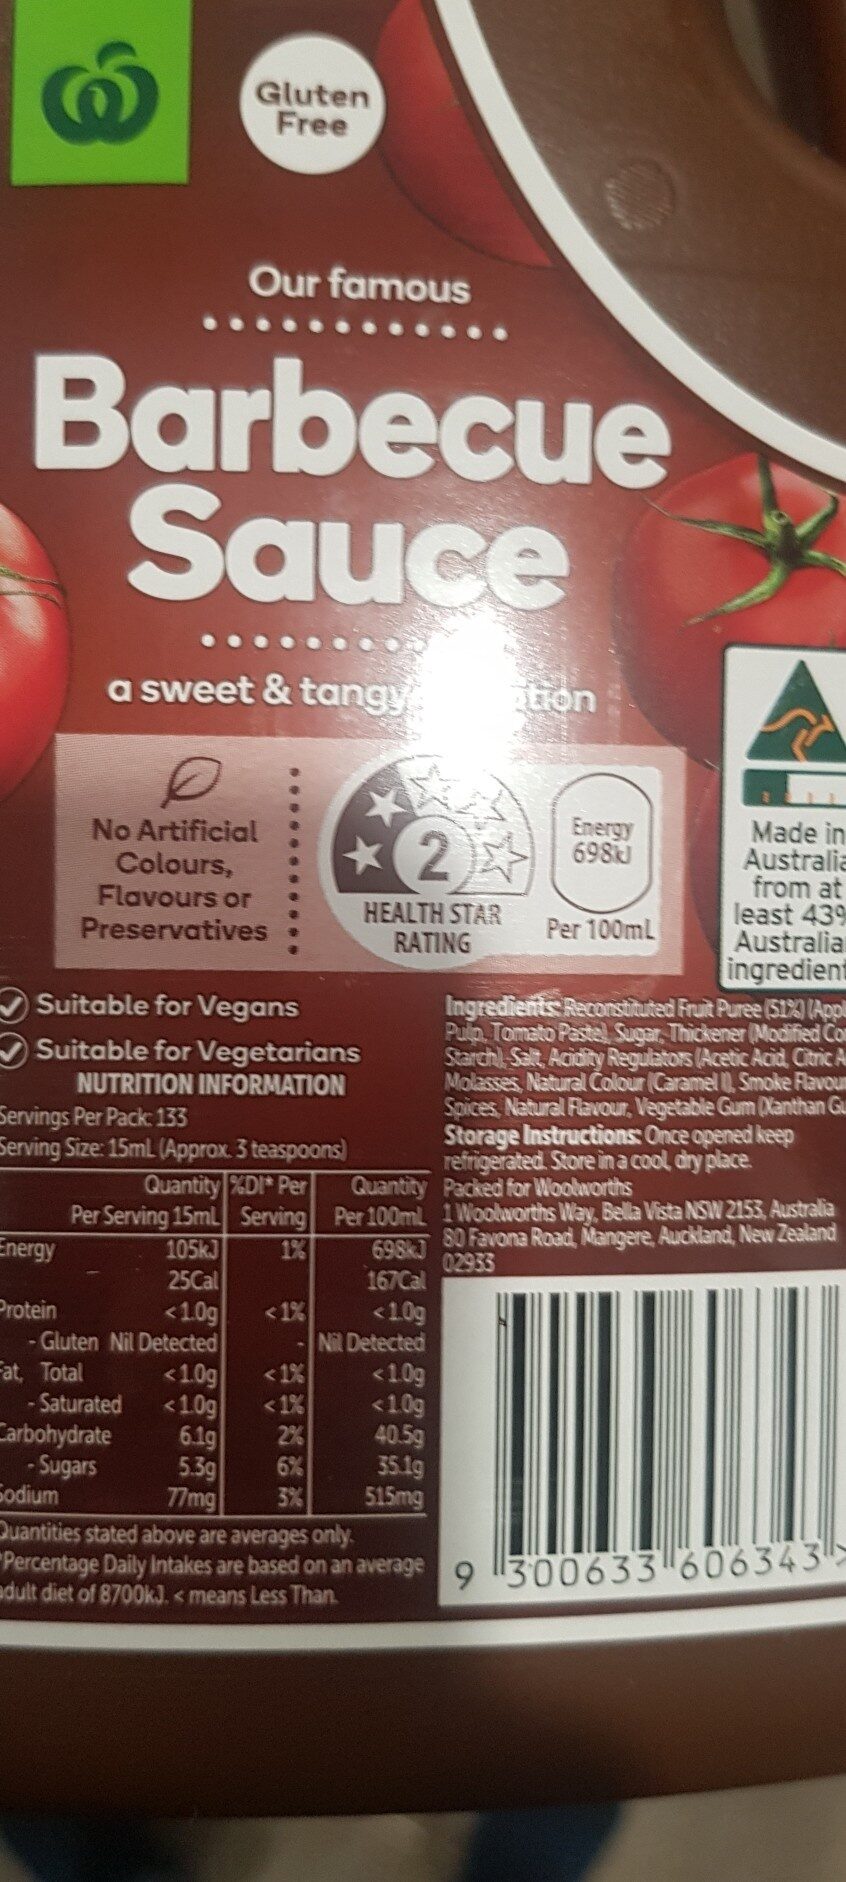 Barbecue Sauce - Ingredients